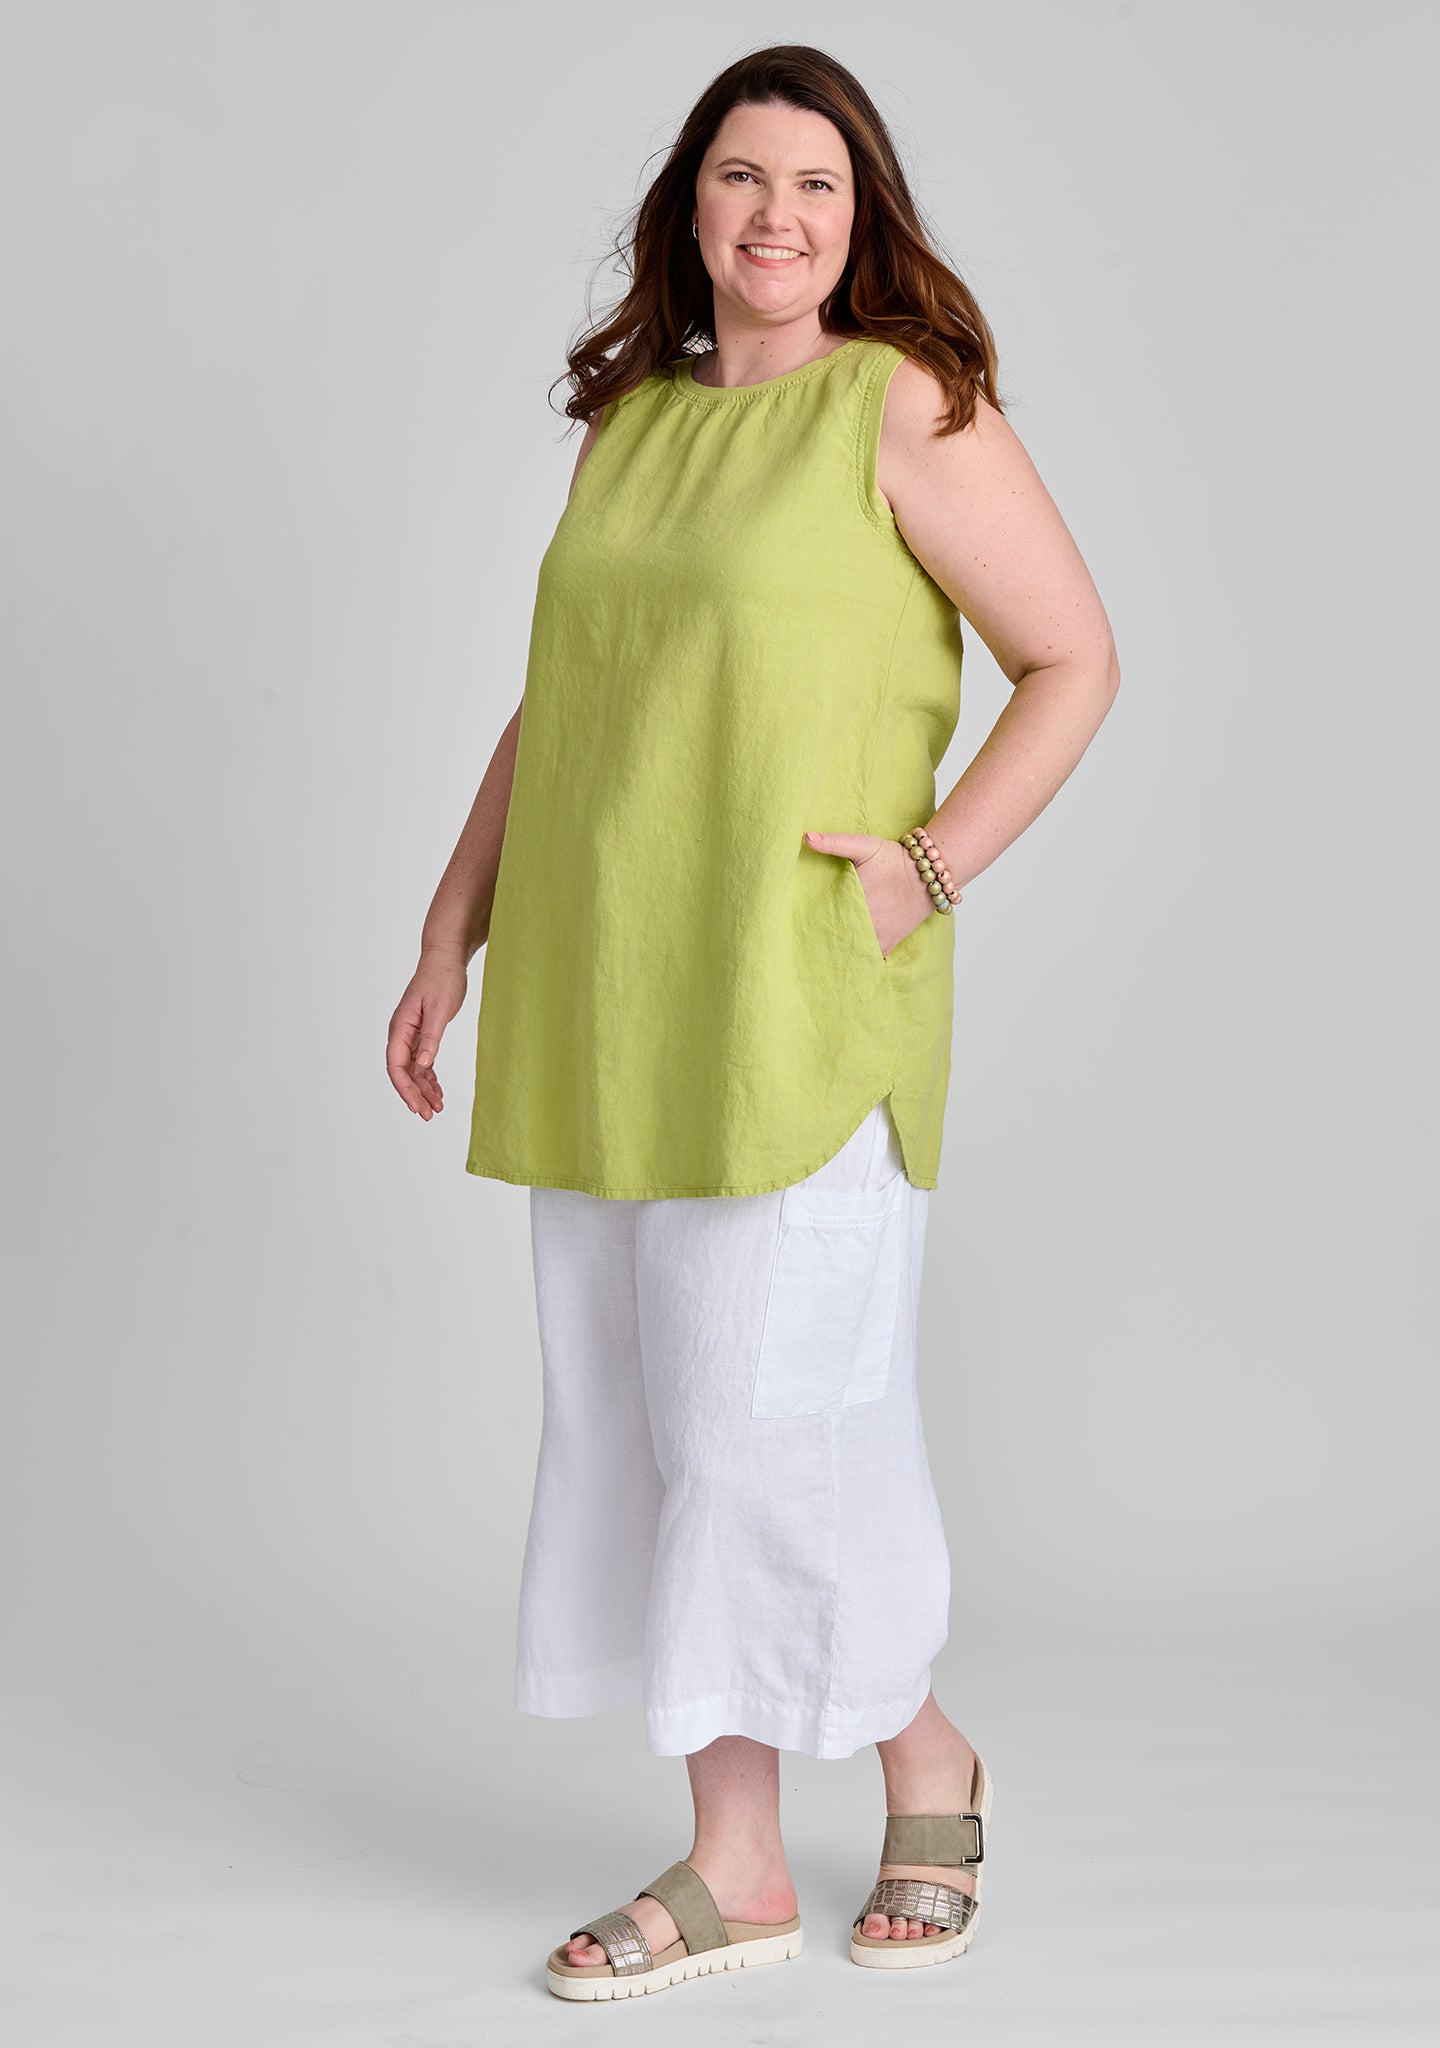 FLAX linen tank in green with linen pants in white